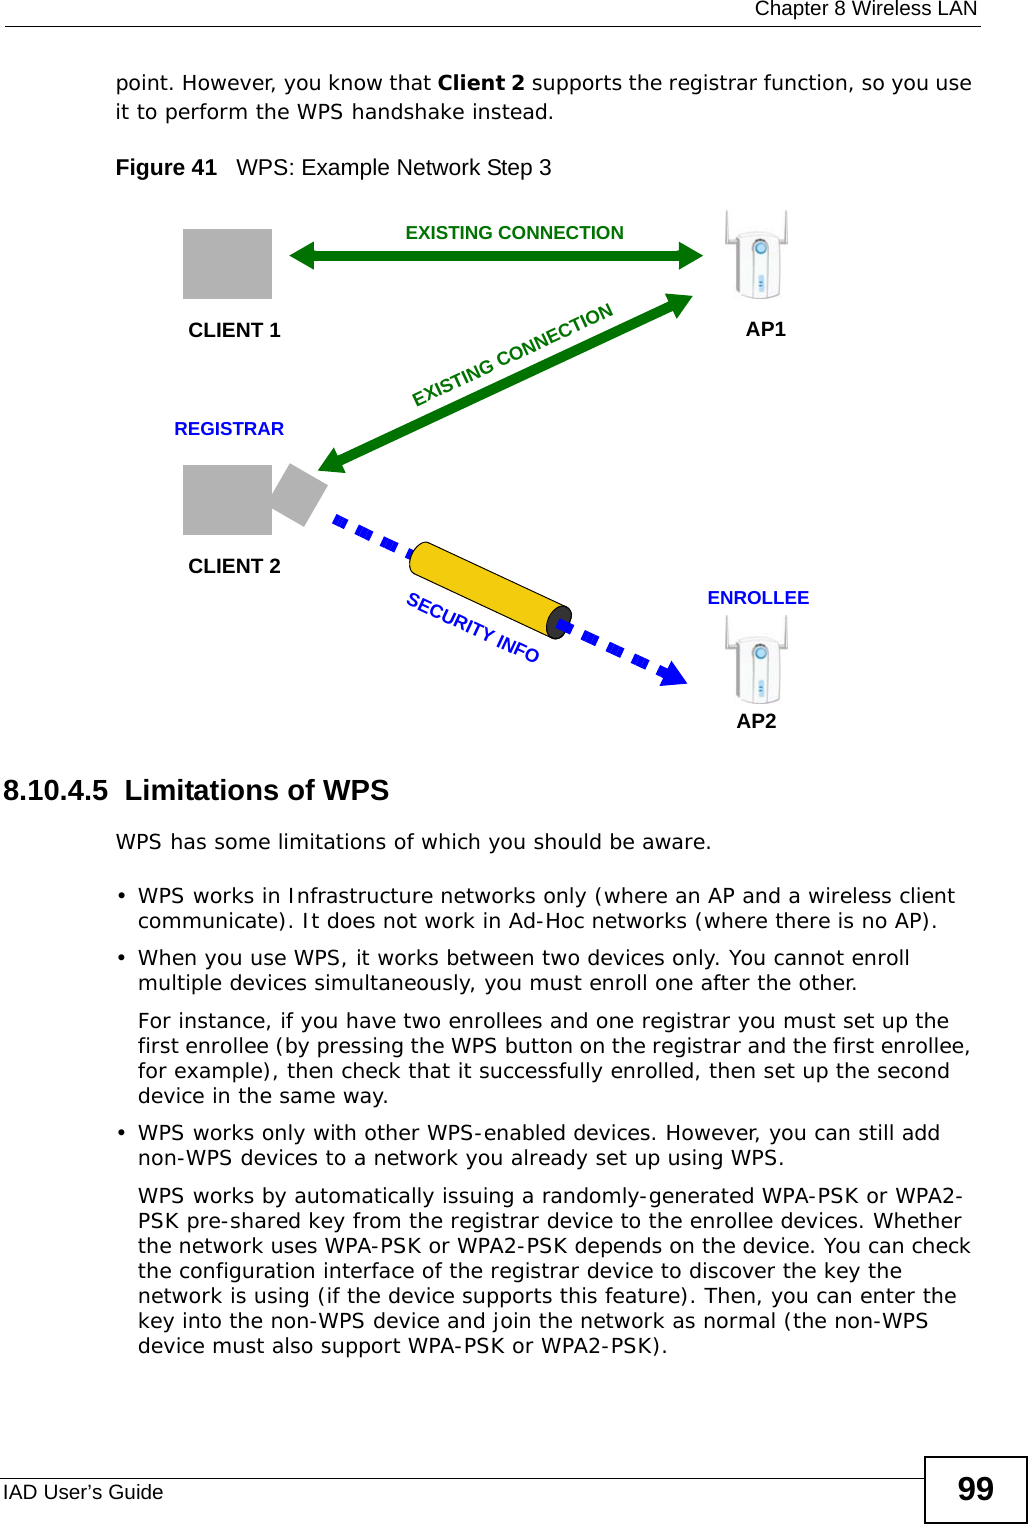  Chapter 8 Wireless LANIAD User’s Guide 99point. However, you know that Client 2 supports the registrar function, so you use it to perform the WPS handshake instead.Figure 41   WPS: Example Network Step 38.10.4.5  Limitations of WPSWPS has some limitations of which you should be aware. • WPS works in Infrastructure networks only (where an AP and a wireless client communicate). It does not work in Ad-Hoc networks (where there is no AP).• When you use WPS, it works between two devices only. You cannot enroll multiple devices simultaneously, you must enroll one after the other. For instance, if you have two enrollees and one registrar you must set up the first enrollee (by pressing the WPS button on the registrar and the first enrollee, for example), then check that it successfully enrolled, then set up the second device in the same way.• WPS works only with other WPS-enabled devices. However, you can still add non-WPS devices to a network you already set up using WPS. WPS works by automatically issuing a randomly-generated WPA-PSK or WPA2-PSK pre-shared key from the registrar device to the enrollee devices. Whether the network uses WPA-PSK or WPA2-PSK depends on the device. You can check the configuration interface of the registrar device to discover the key the network is using (if the device supports this feature). Then, you can enter the key into the non-WPS device and join the network as normal (the non-WPS device must also support WPA-PSK or WPA2-PSK).CLIENT 1 AP1REGISTRARCLIENT 2EXISTING CONNECTIONSECURITY INFOENROLLEEAP2EXISTING CONNECTION